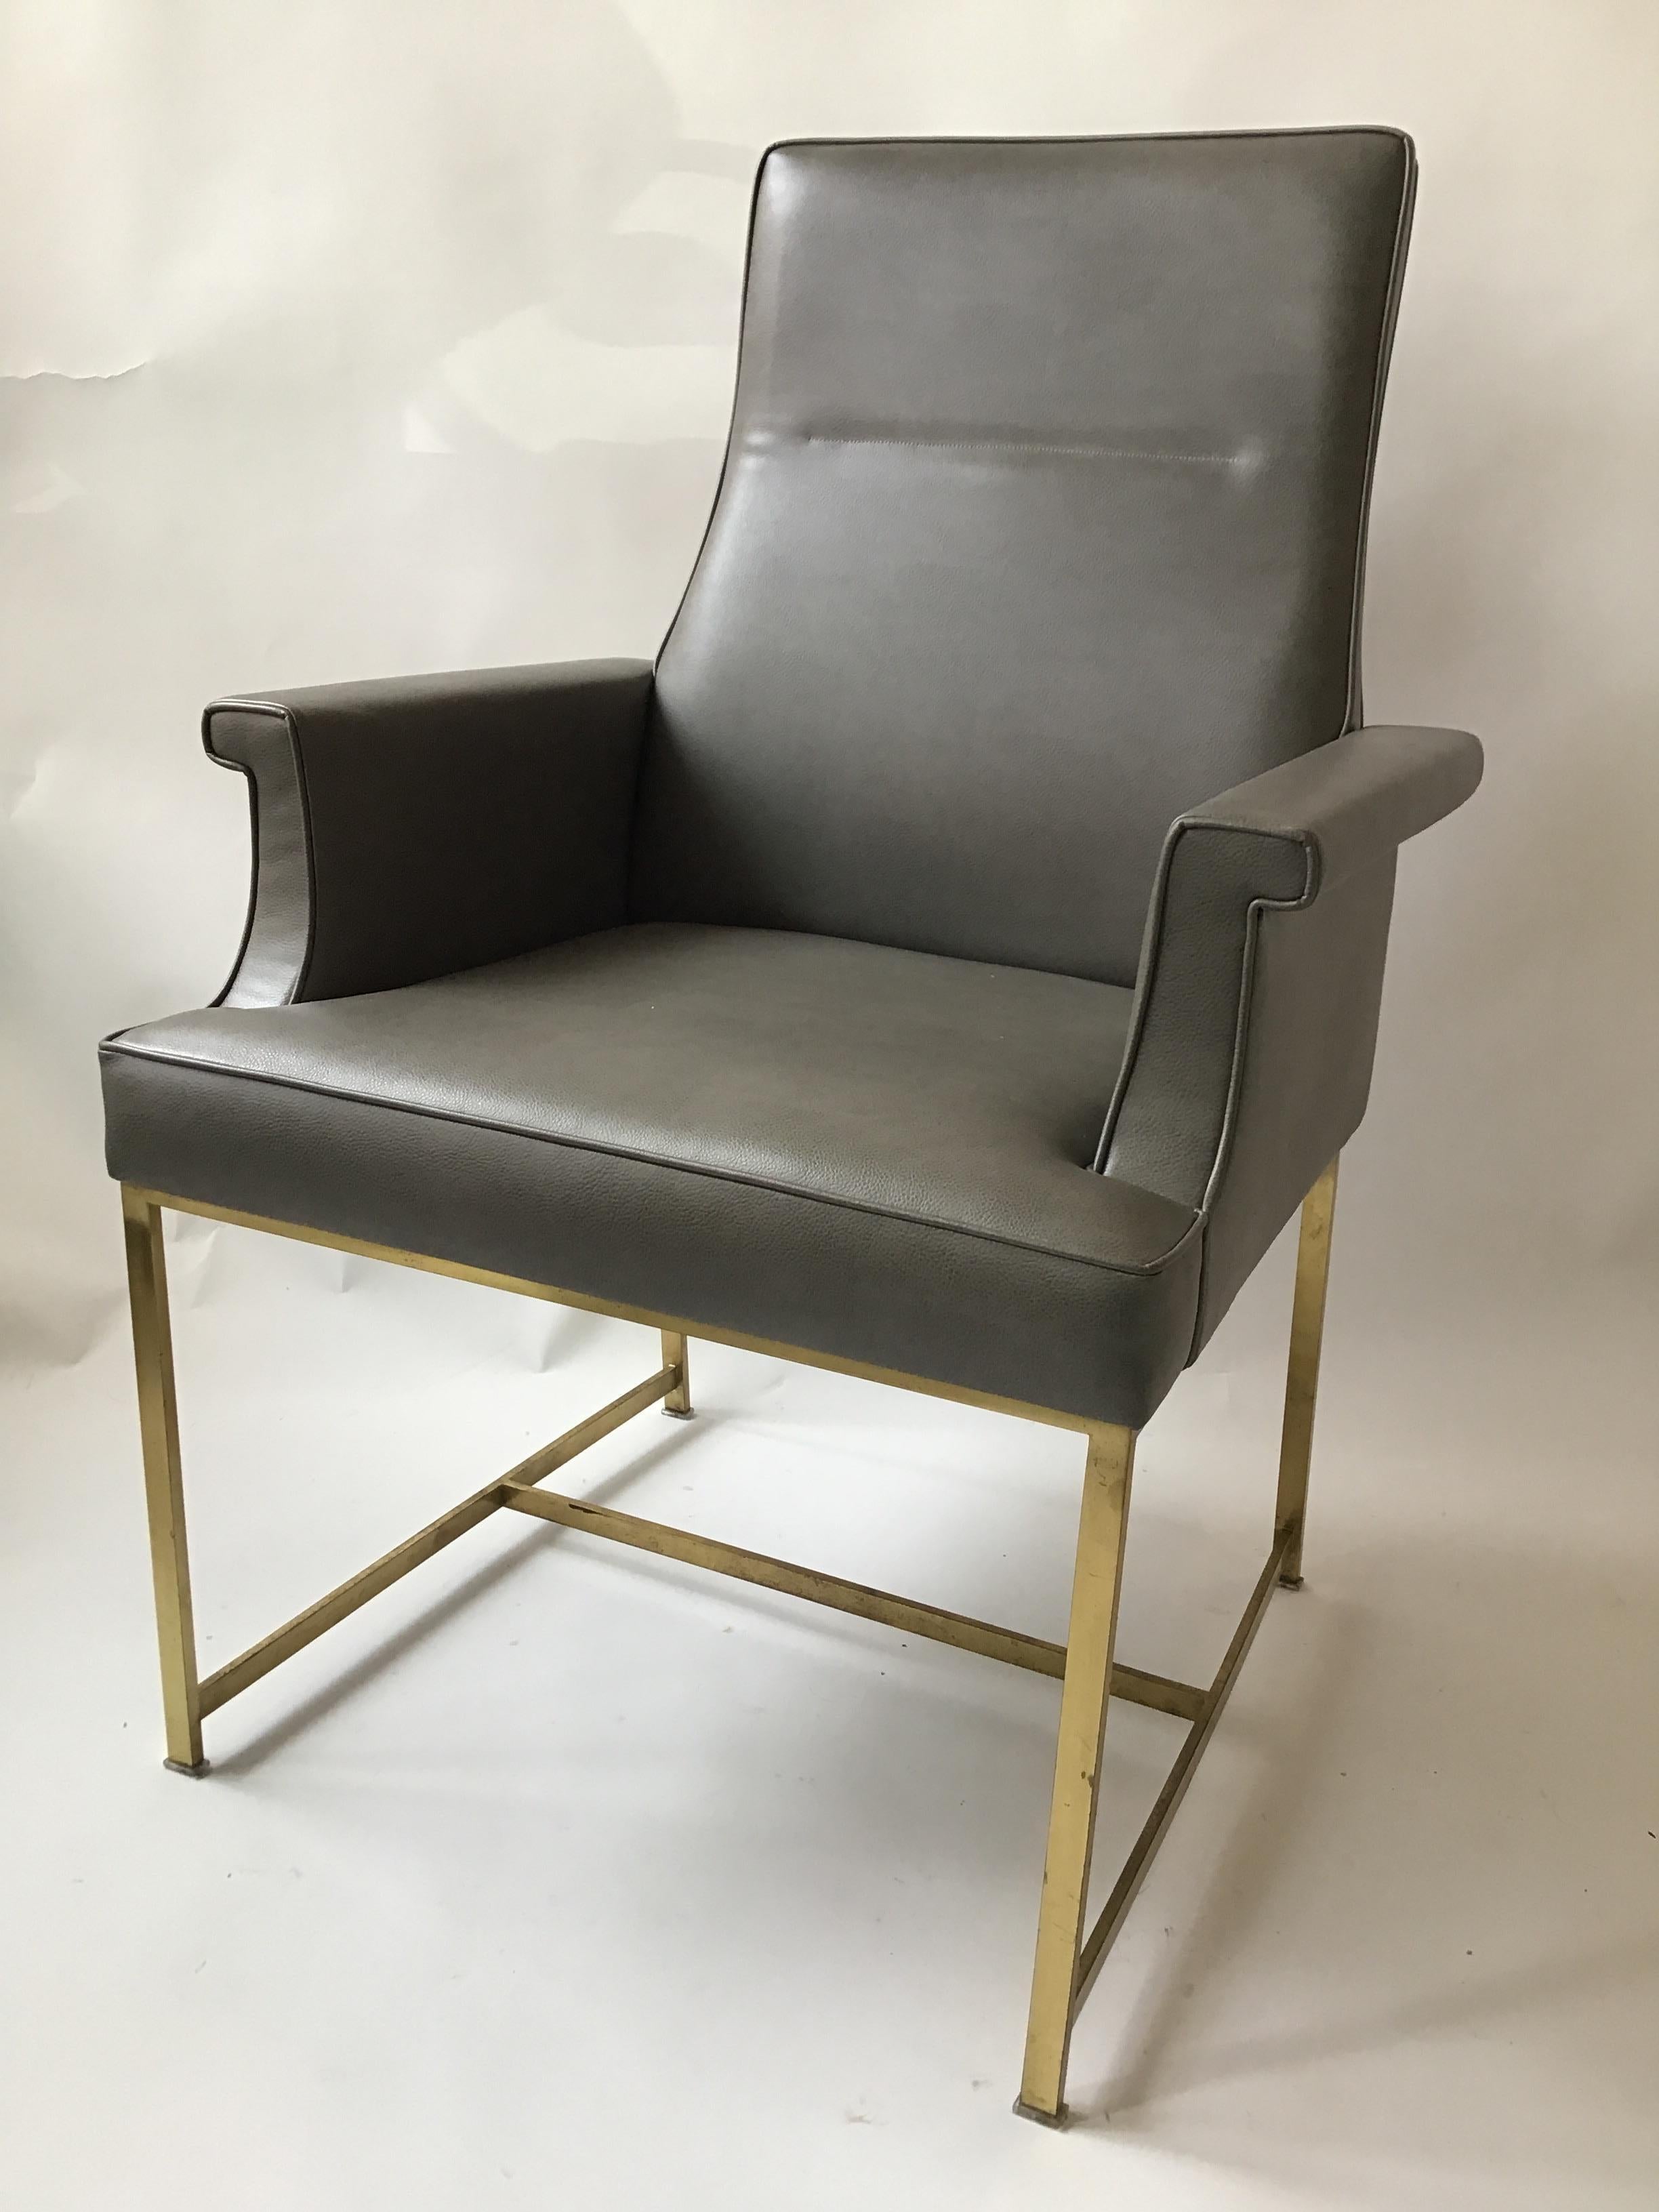 Pair of grey leather armchairs on brass bases. Well made. From a Southampton, NY estate.